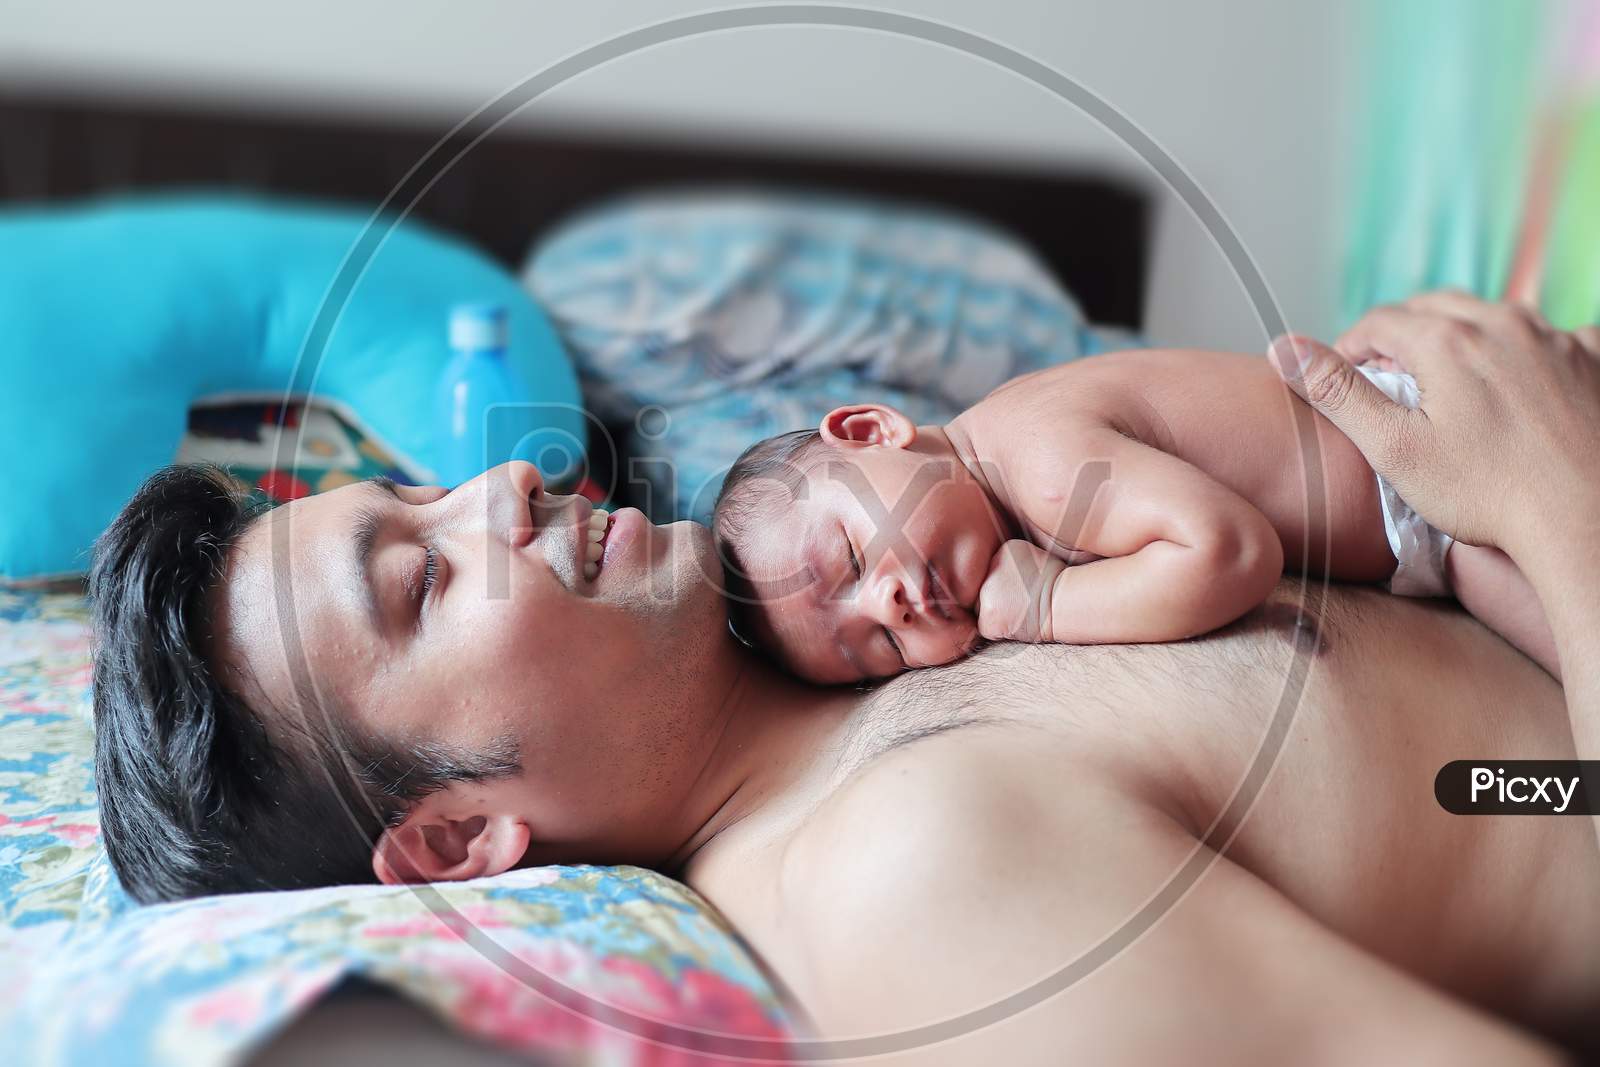 A Baby In Bare Body Peacefully Sleeping On The Body On His Father. Paternity Concept Parenting Photo.